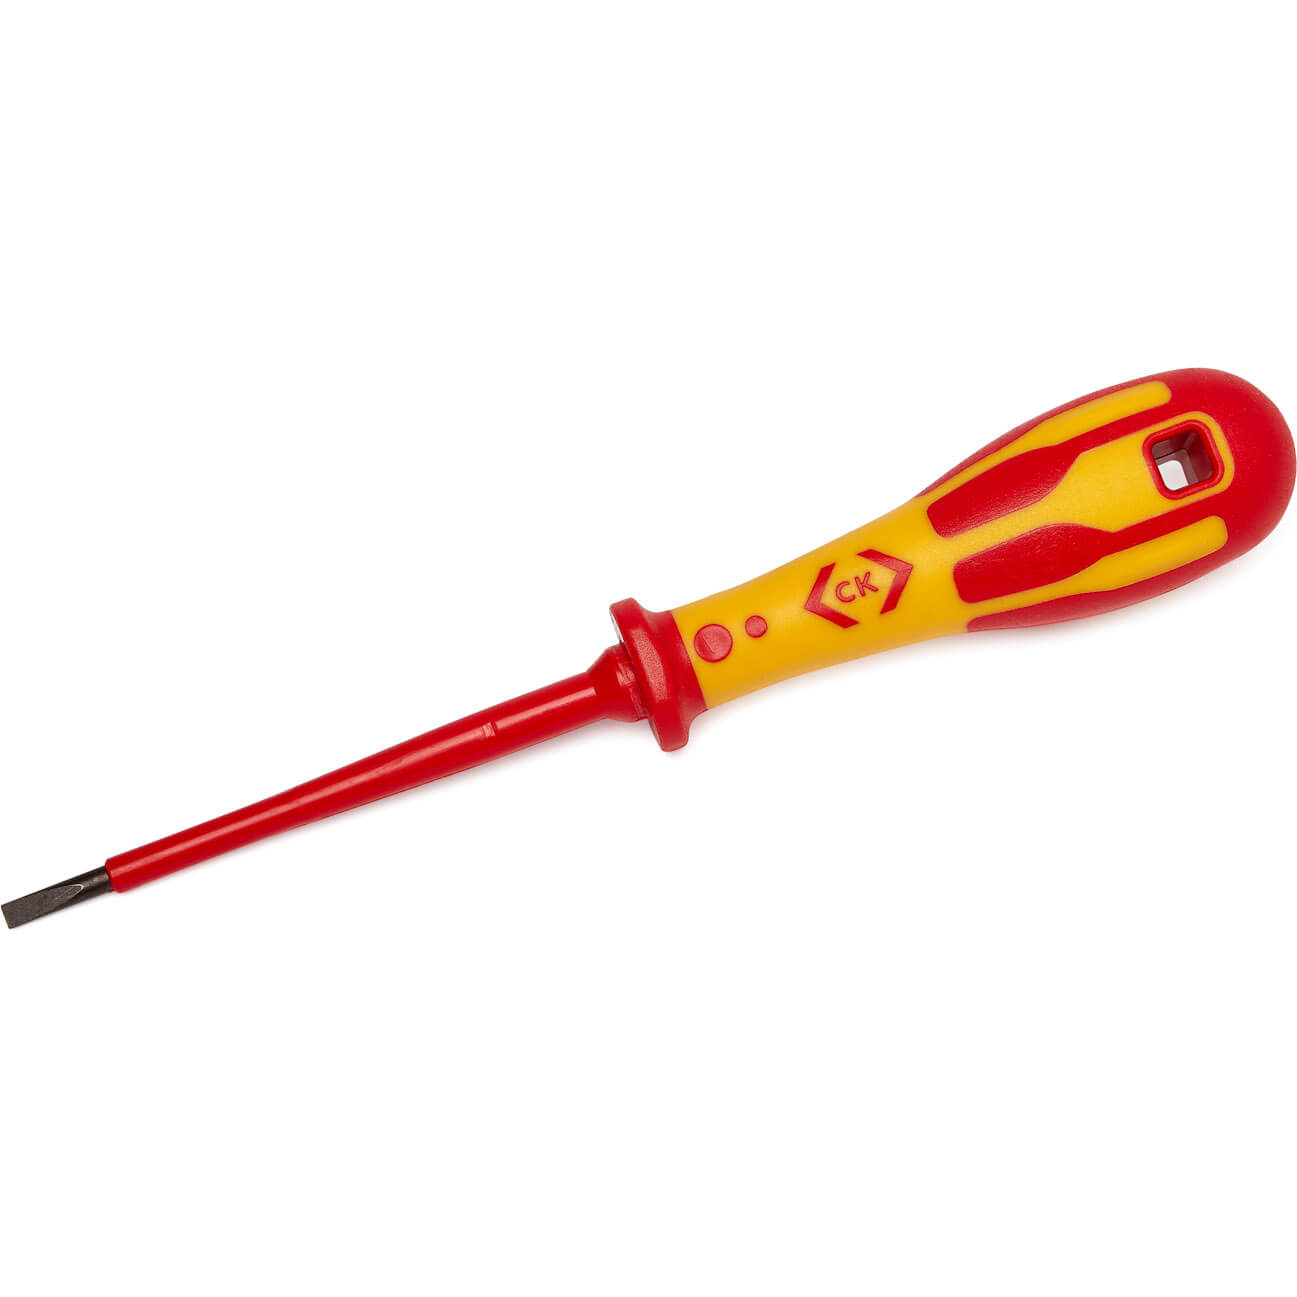 Image of CK Dextro VDE Insulated Parallel Slotted Screwdriver 10mm 200mm